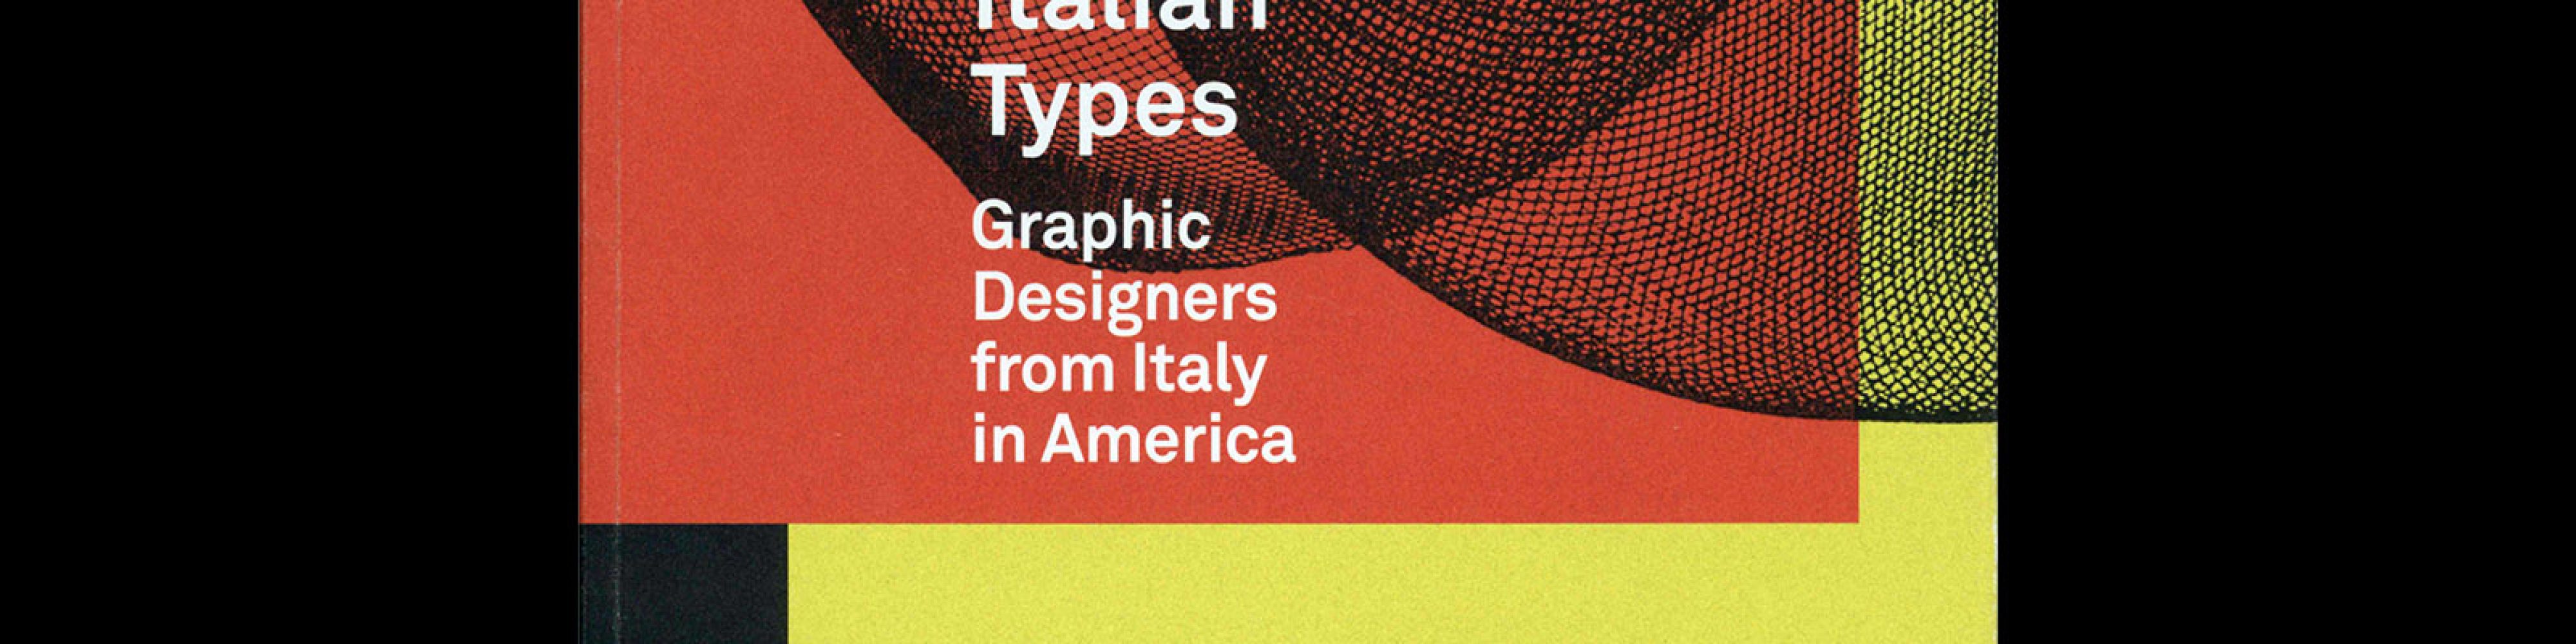 Italian Types - Graphic Designers from Italy in America, 2019